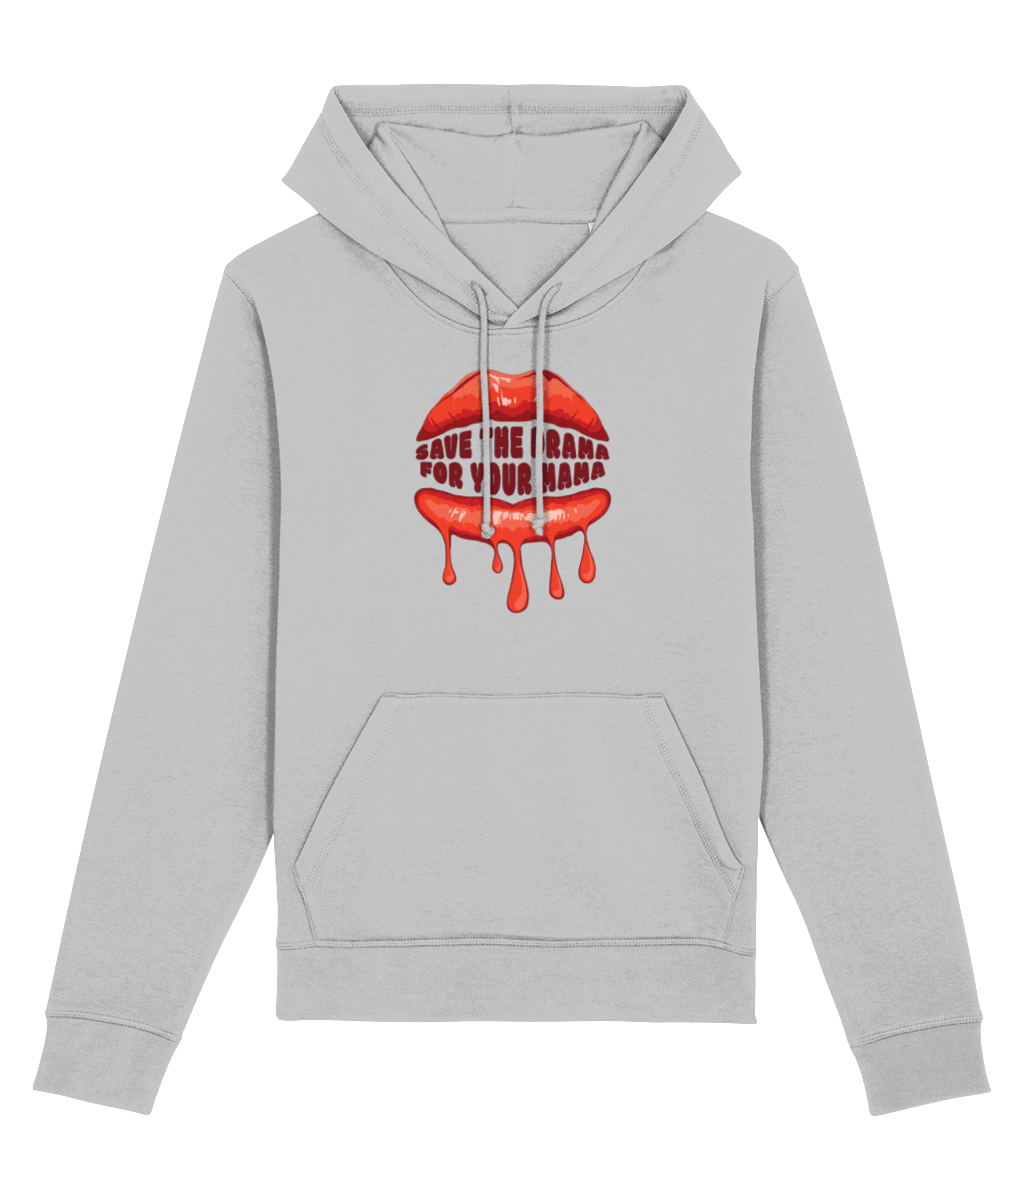 Contemporary 'Save The Drama' Organic Cotton Hoodie - Hoodie Gift